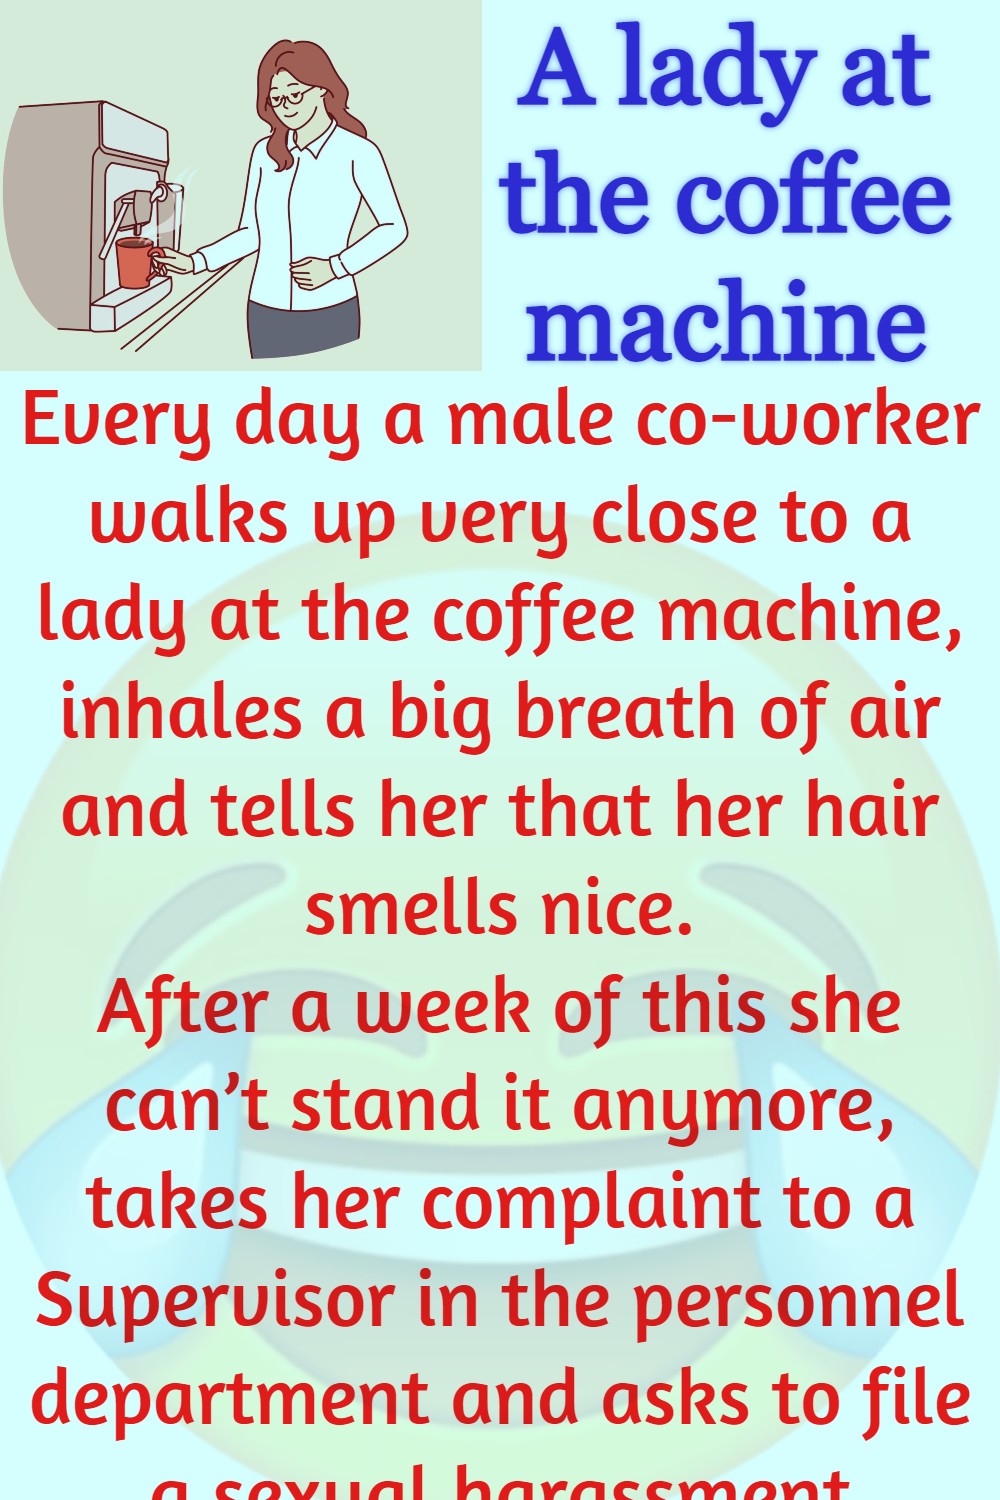 A lady at the coffee machine